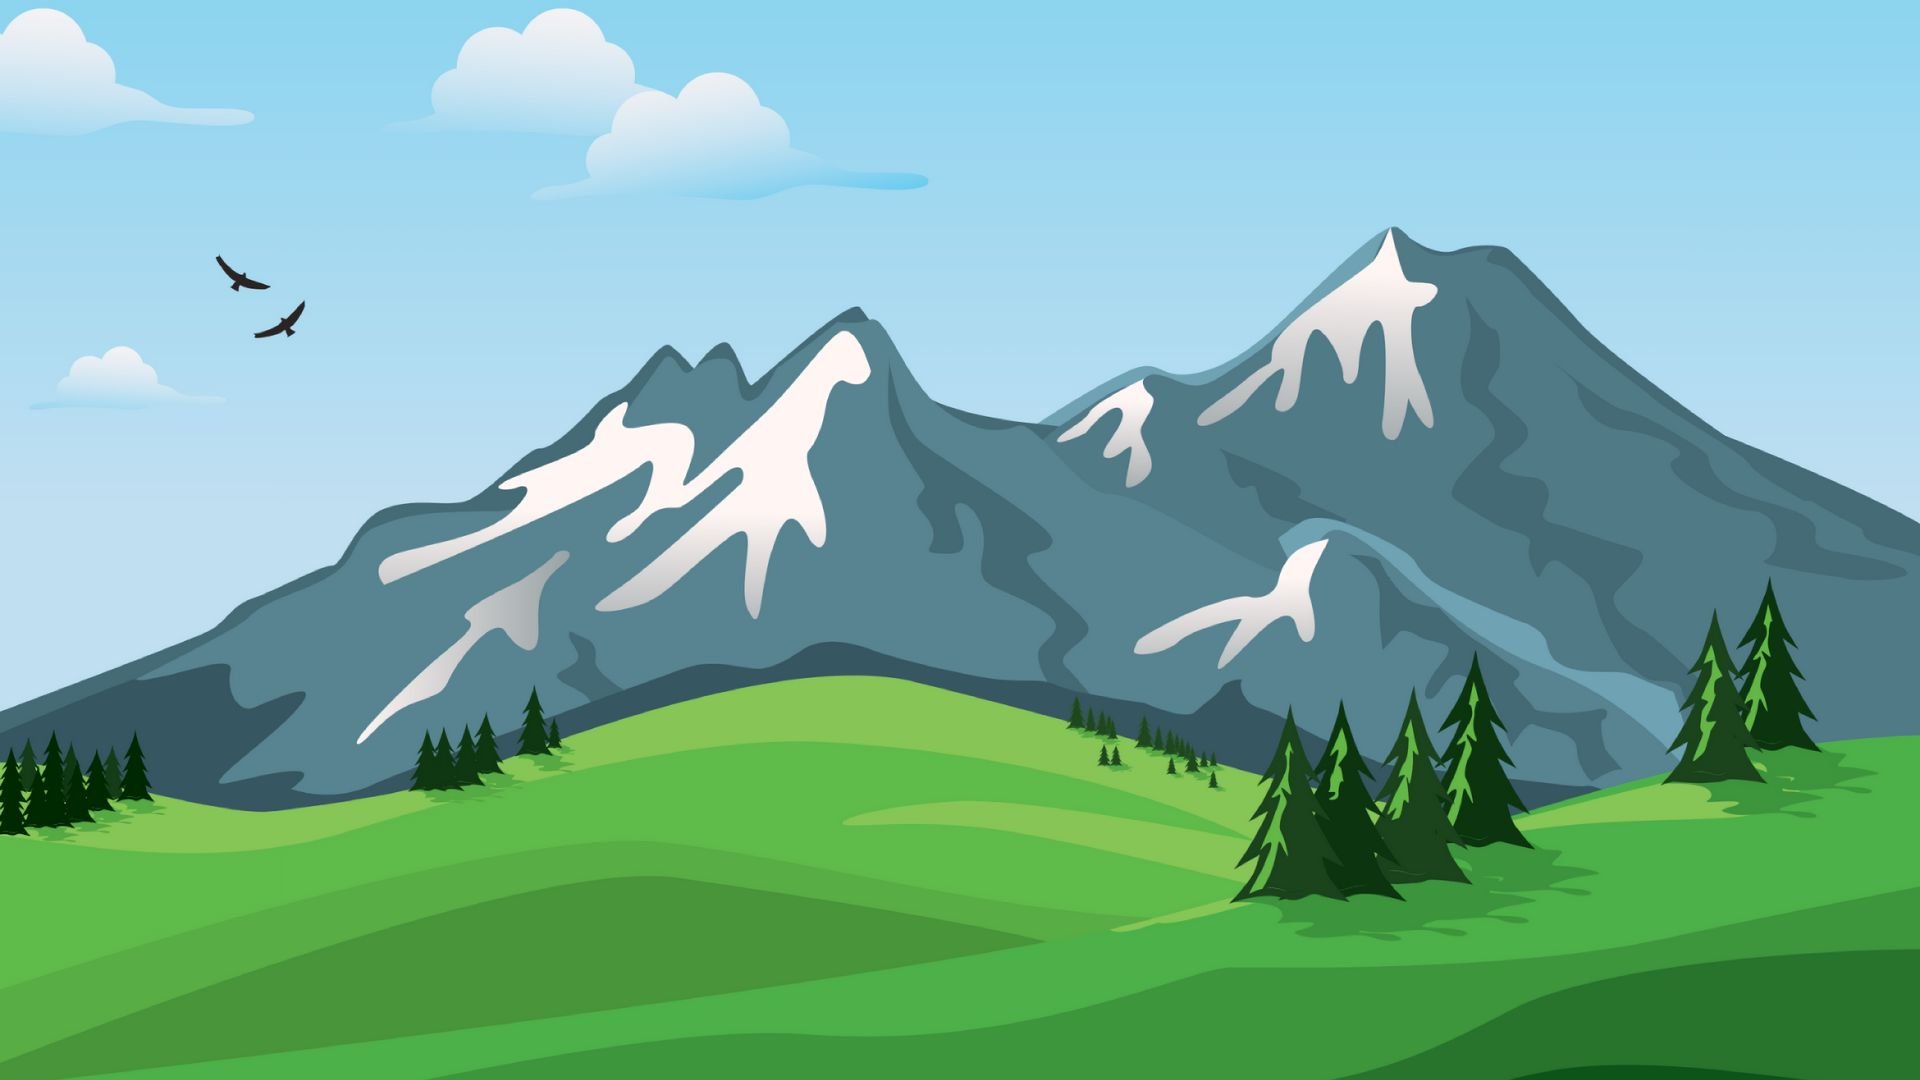 Download wallpaper 1920x1080 mountains, vector, landscape, nature full hd, hdtv, fhd, 1080p HD background